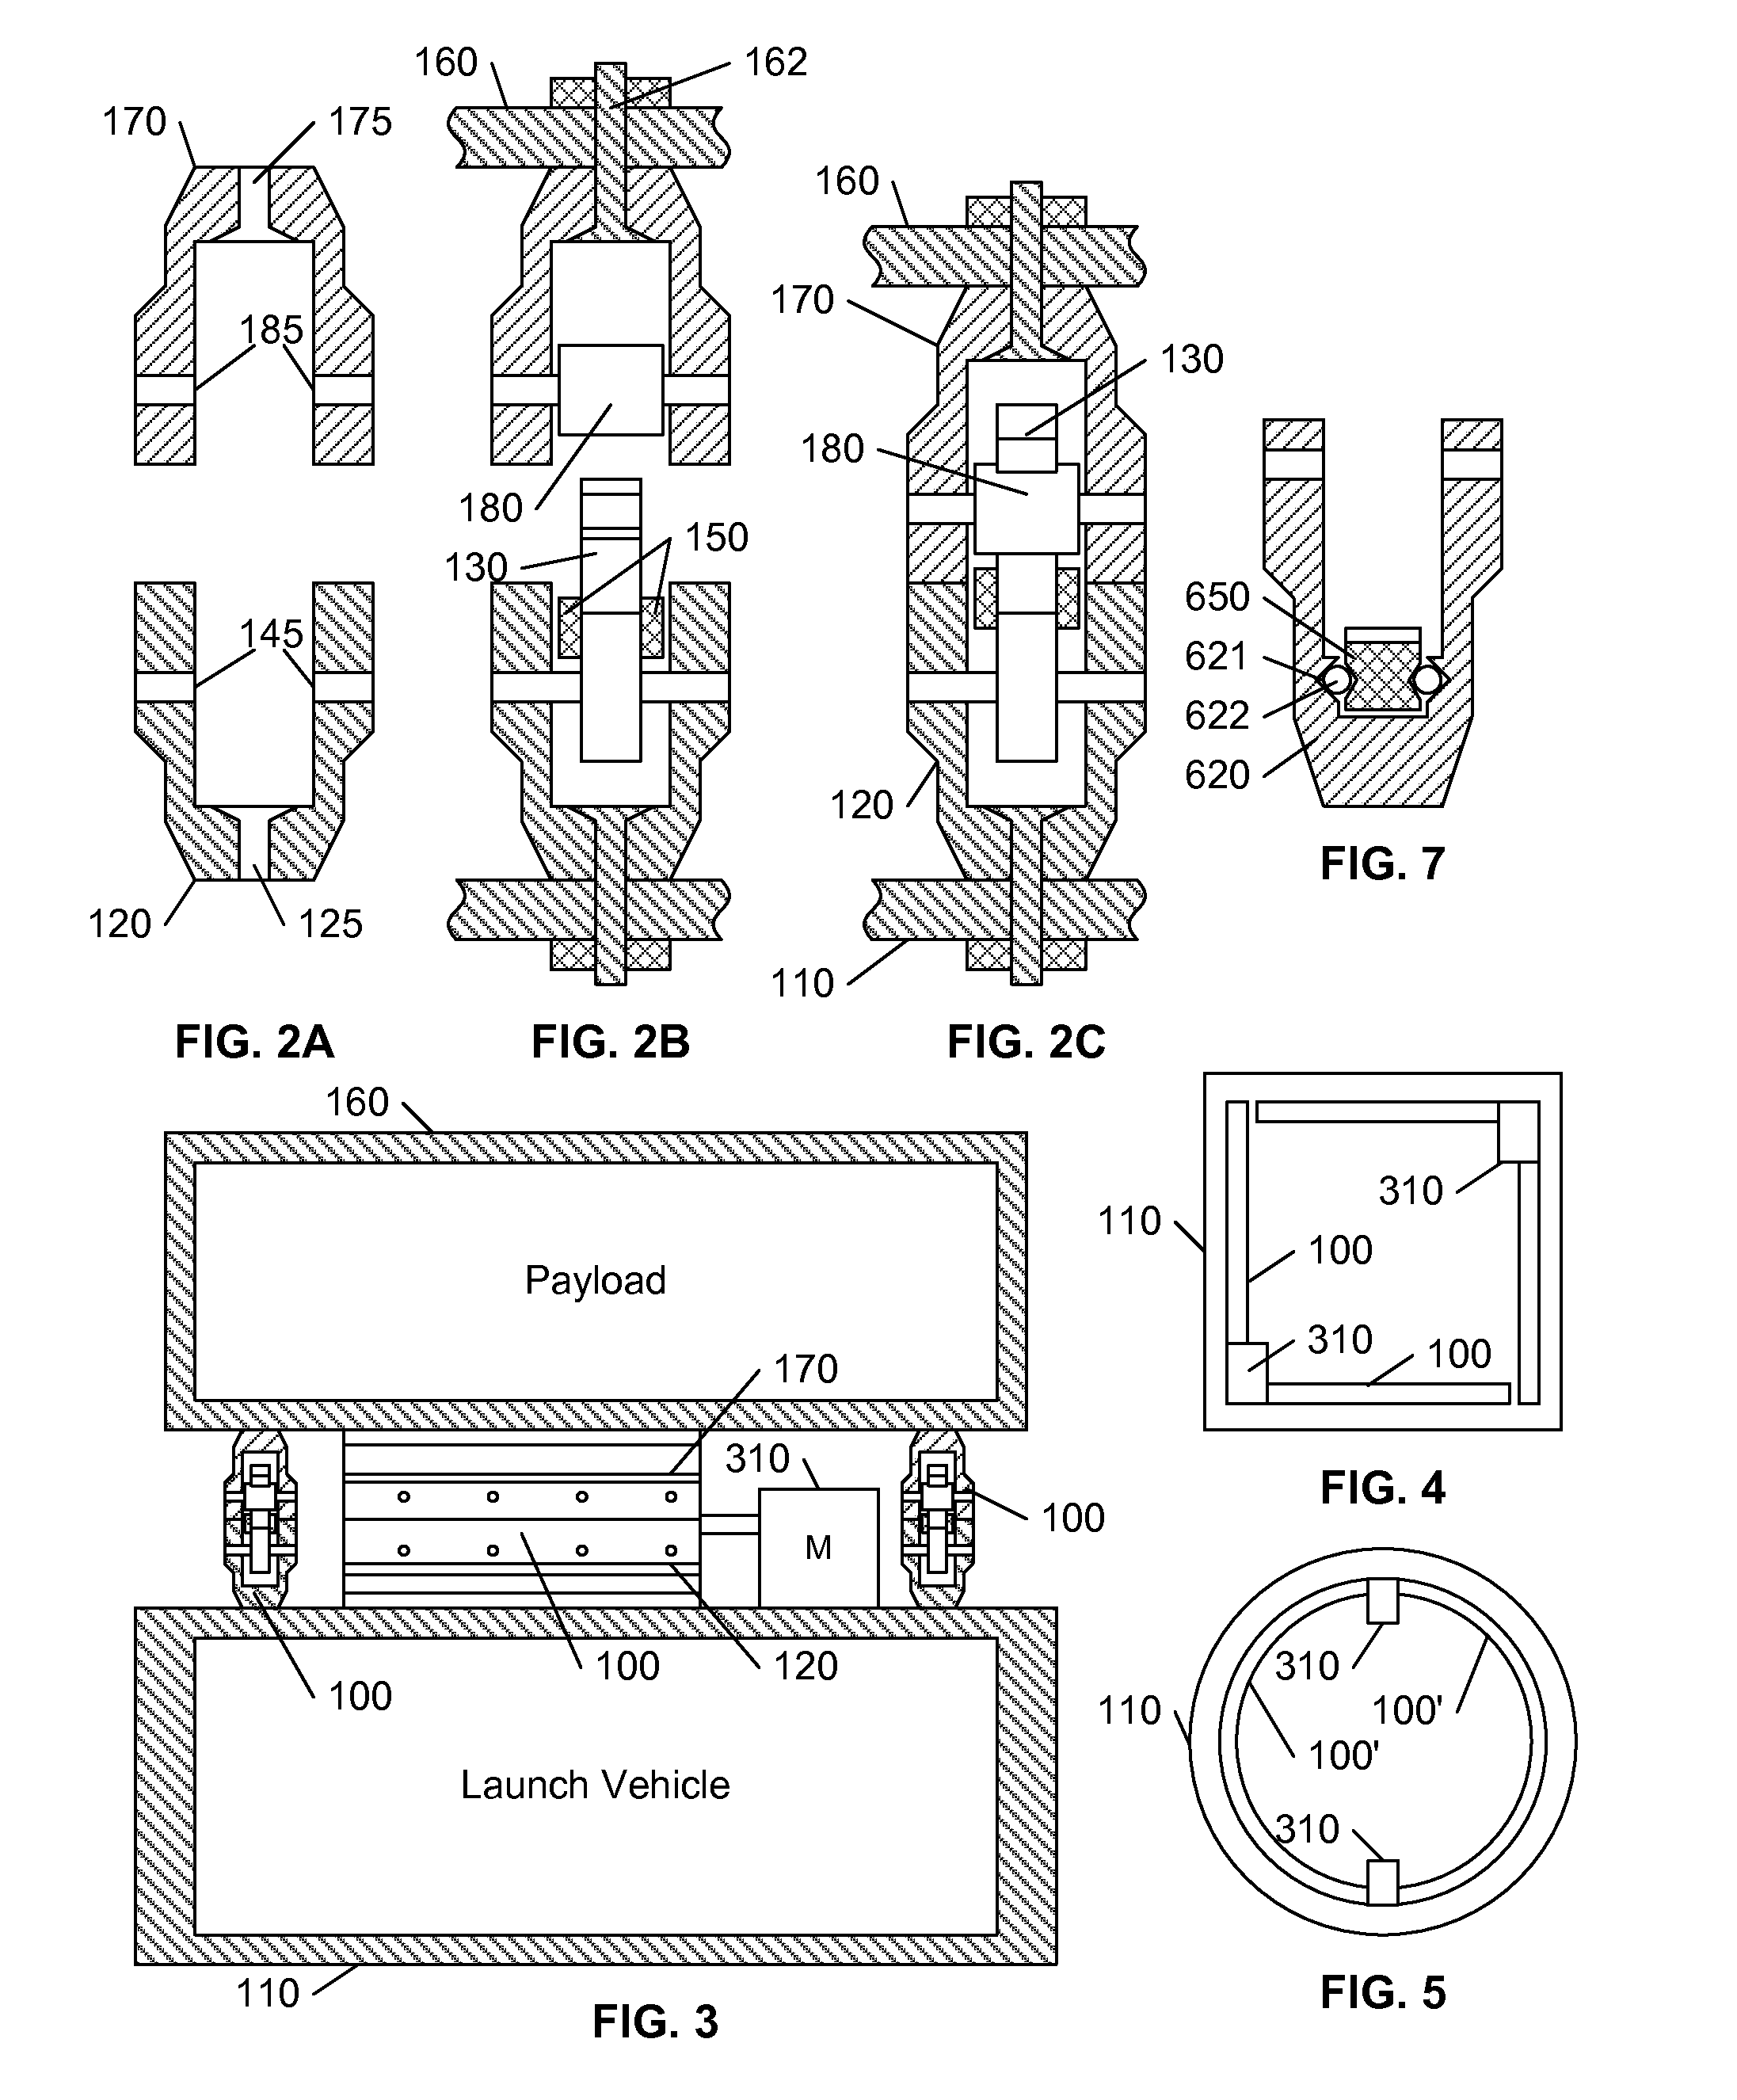 Latching separation system